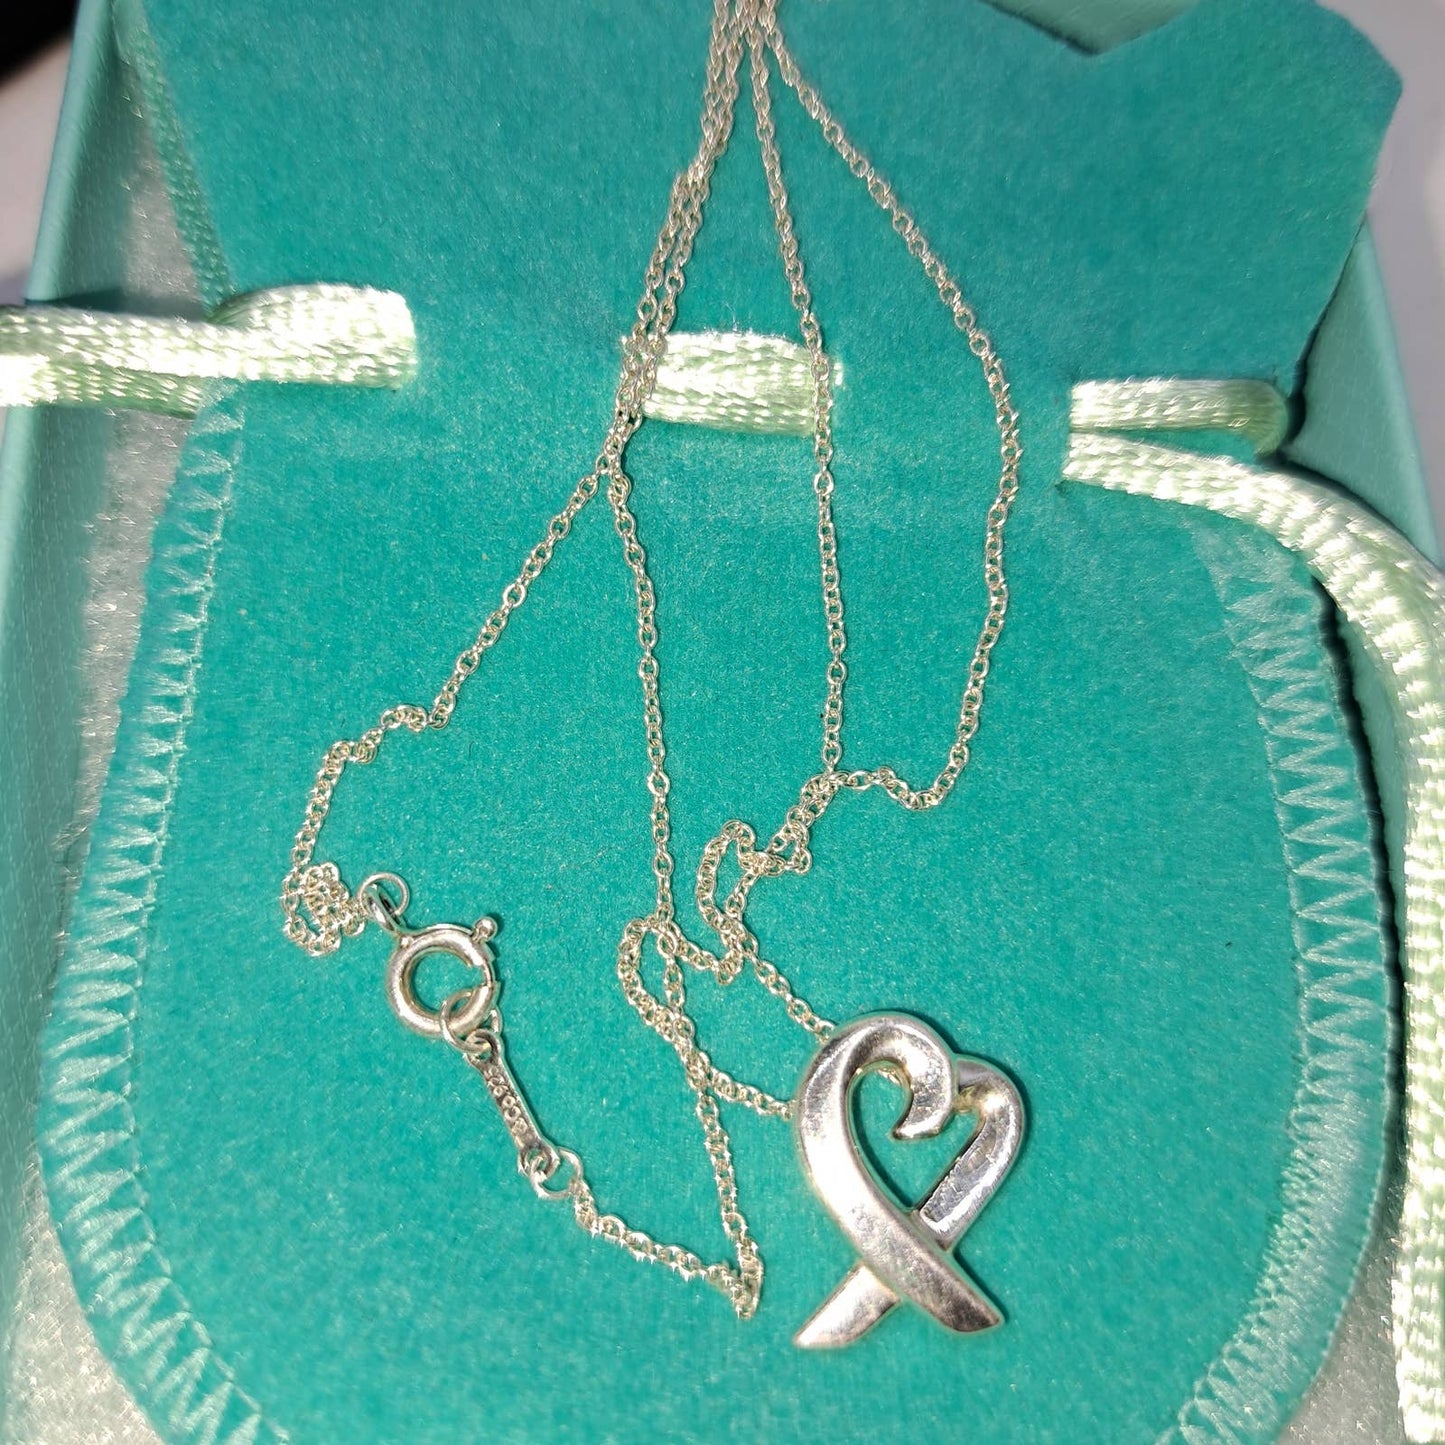 Authentic Tiffany Loving Heart necklace designed by Paloma Picasso